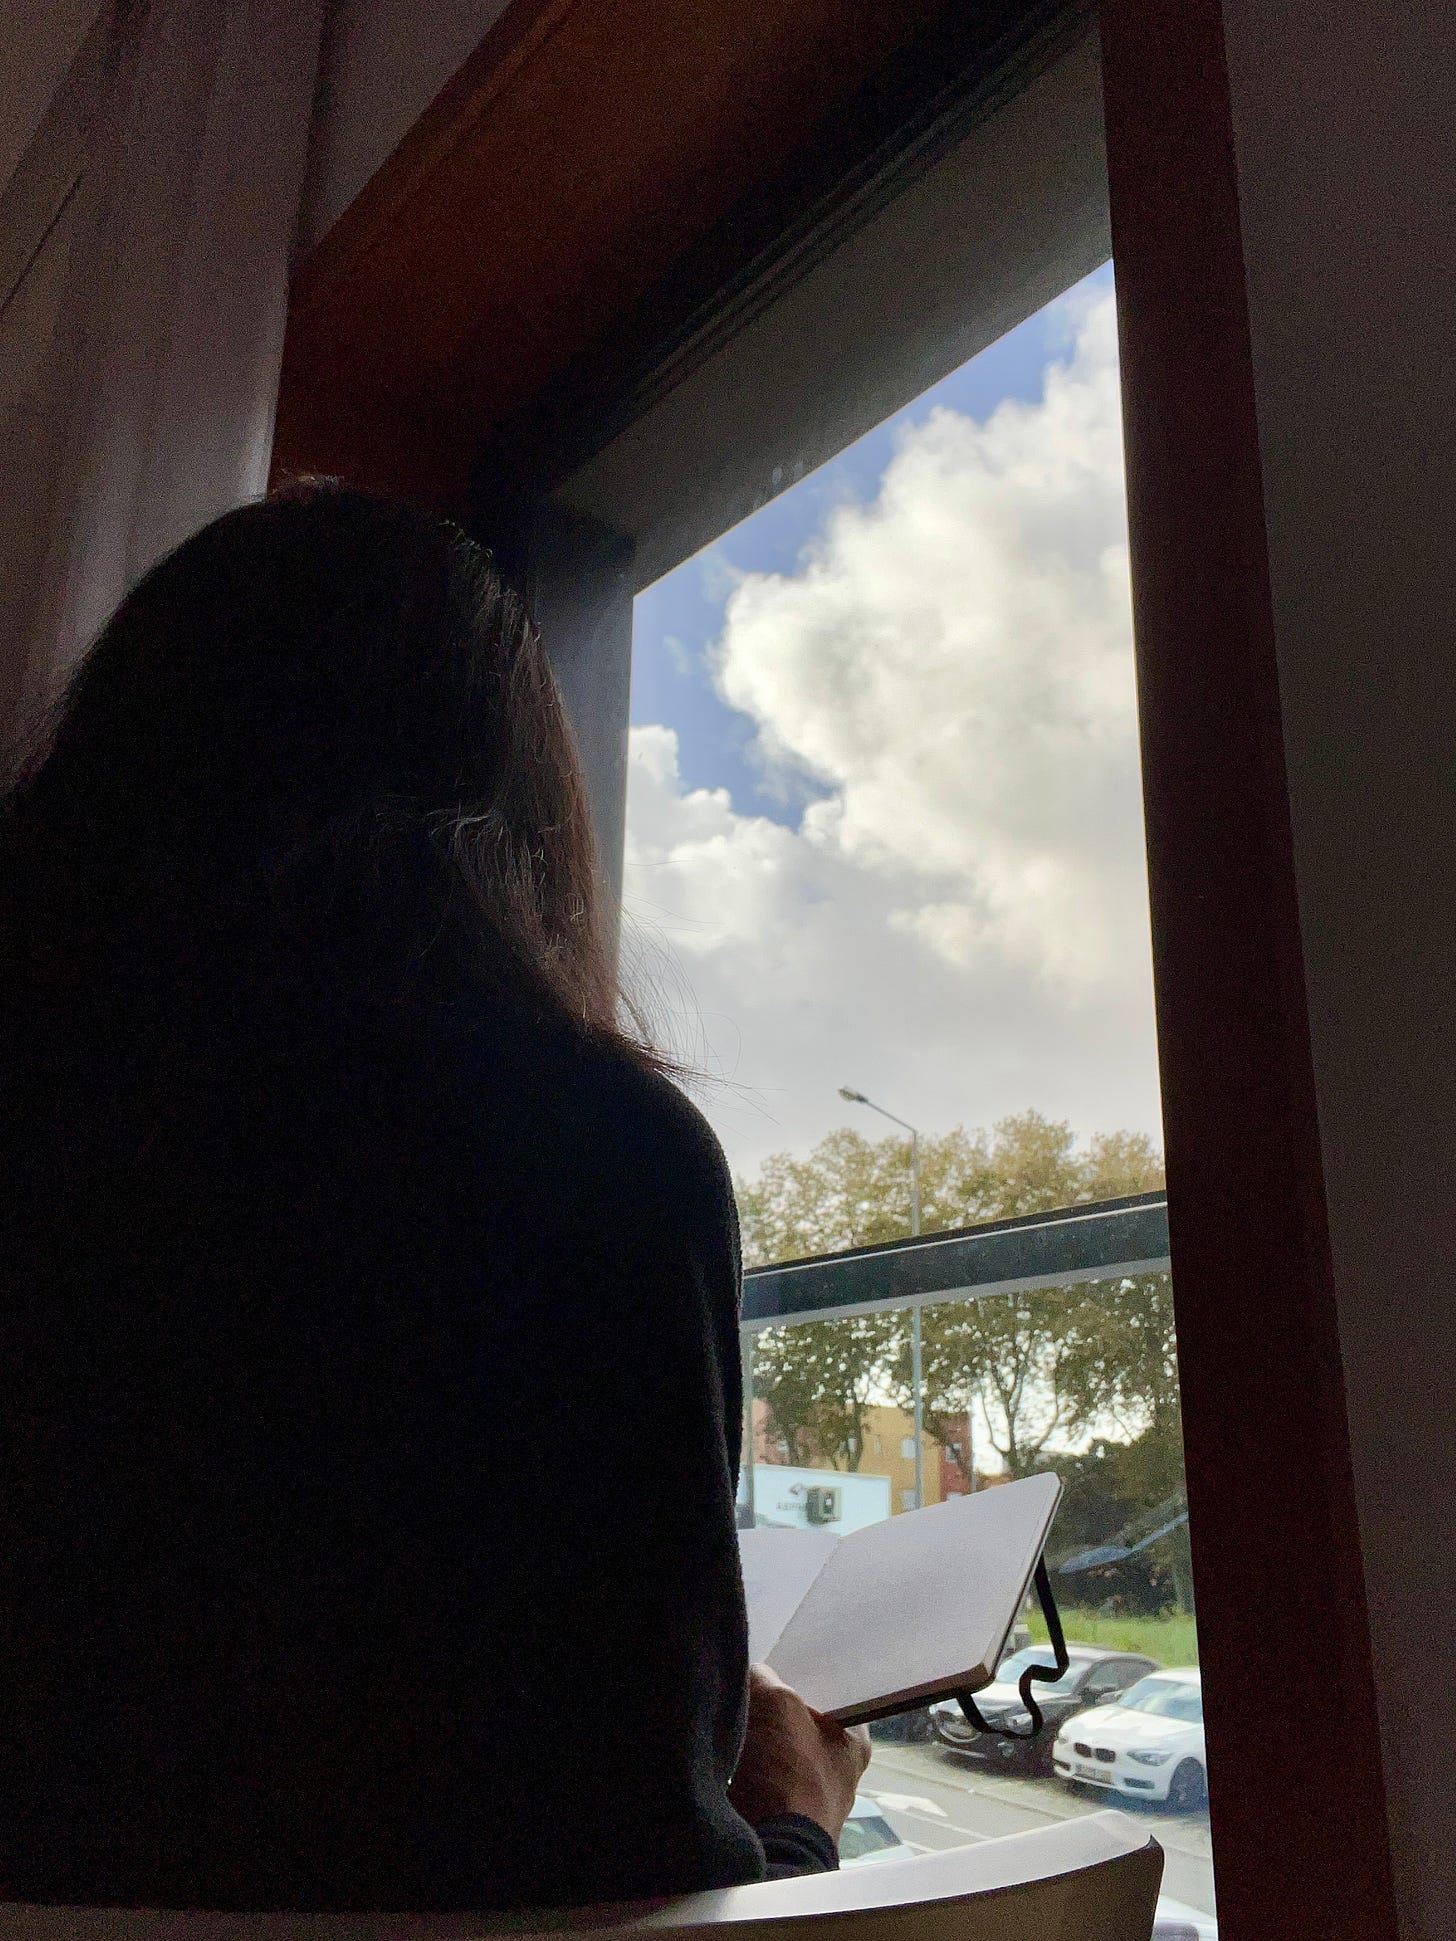 image: a woman's back, facing the window, with trees in the distant, she's holding a sketchbook and is engrossed in her drawing.